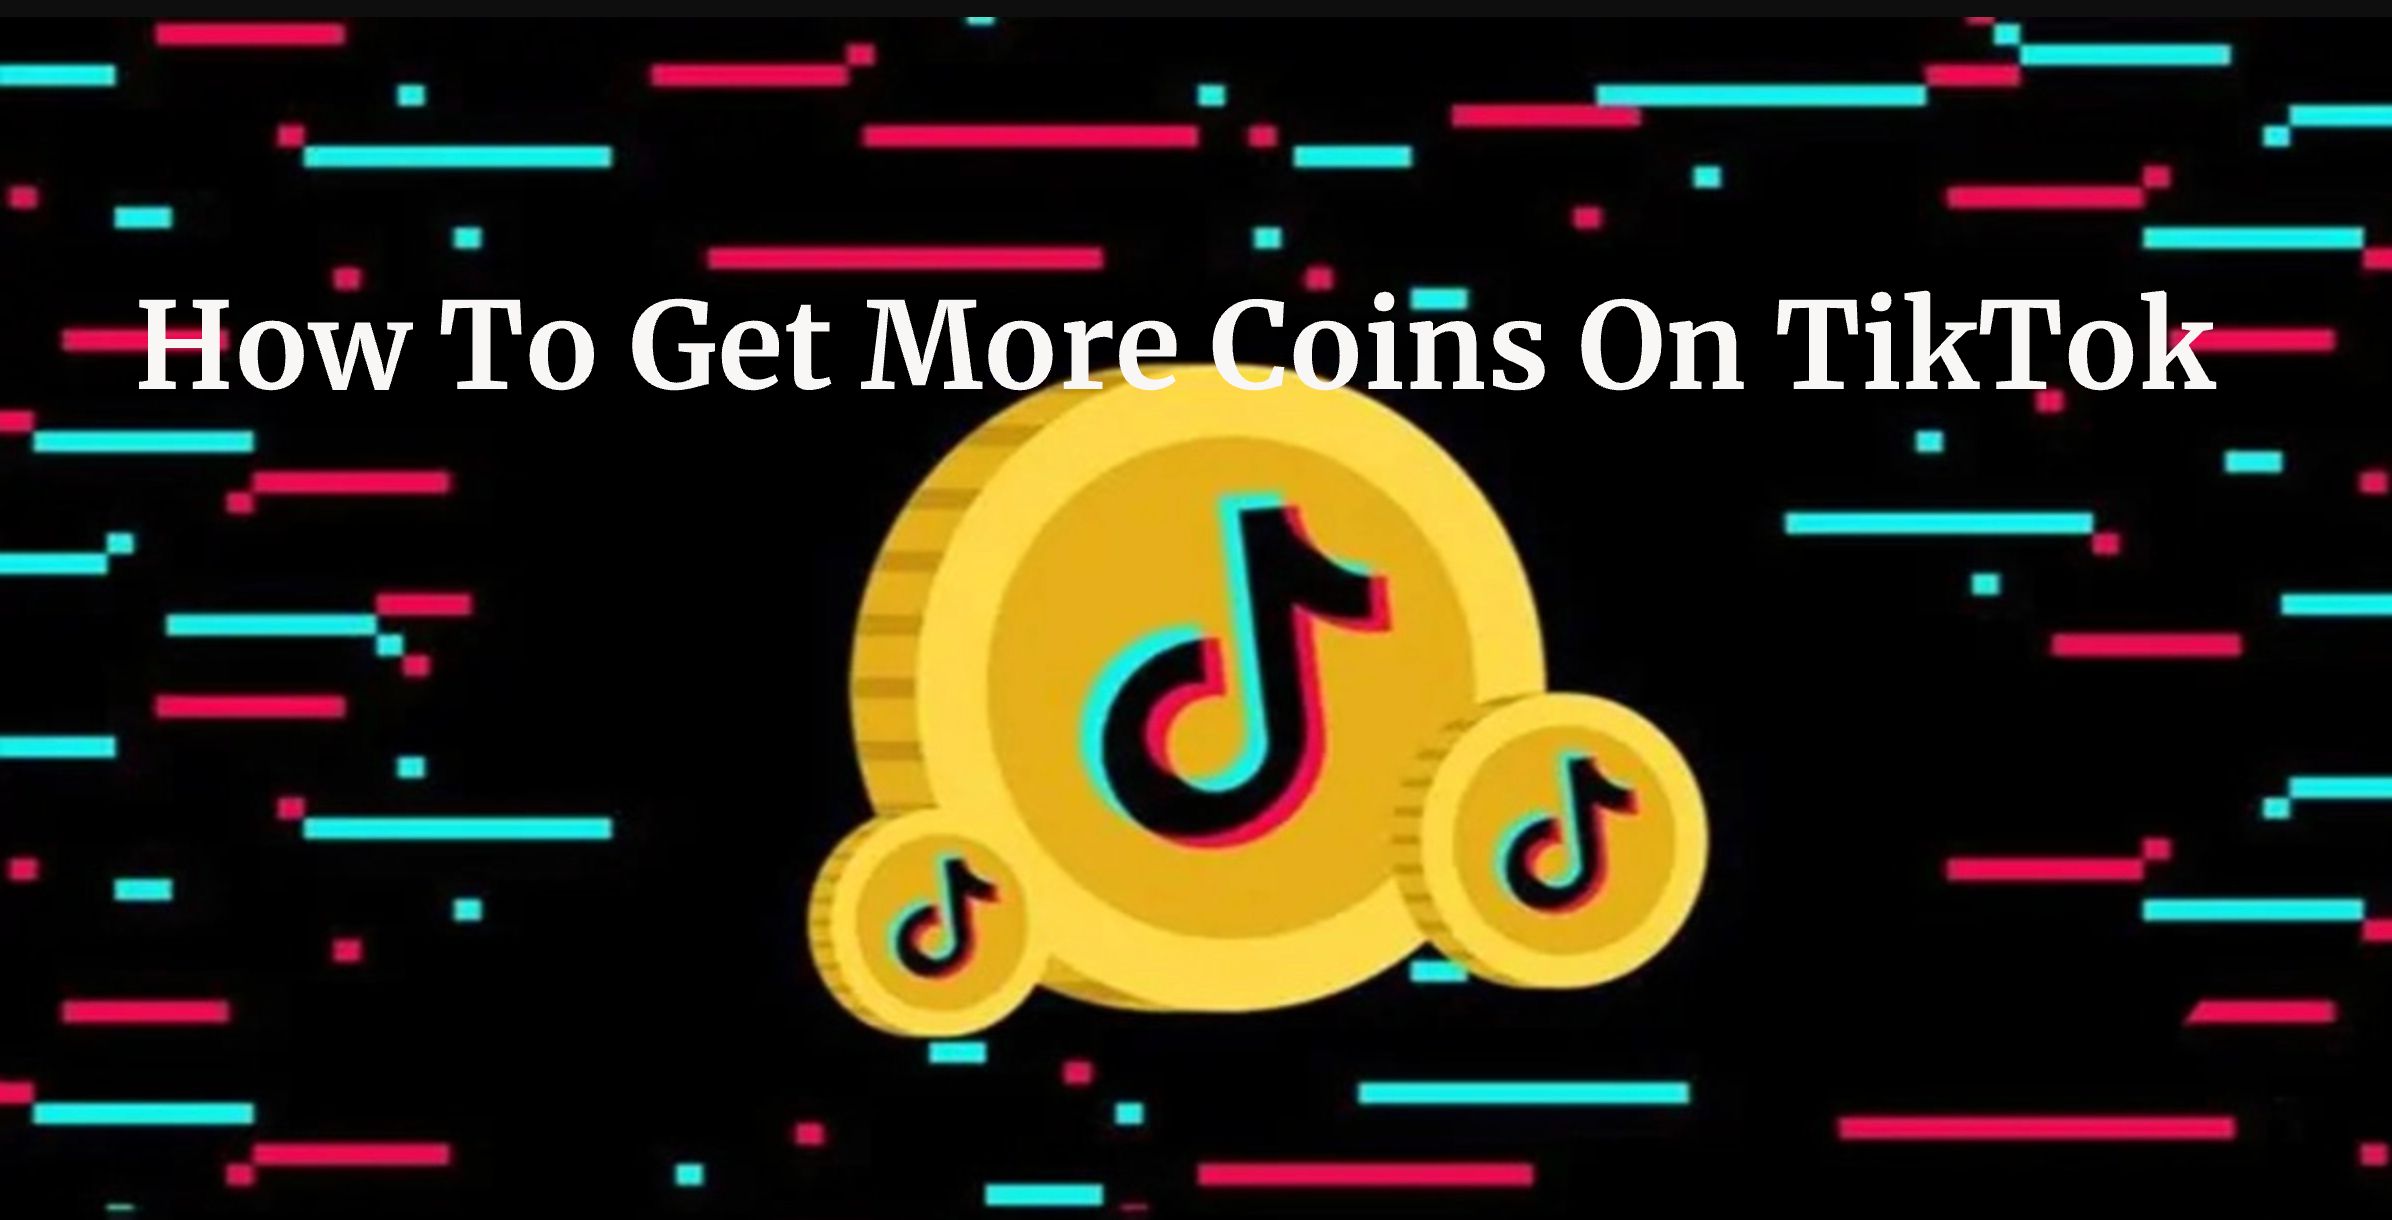 How To Get More Coins On TikTok